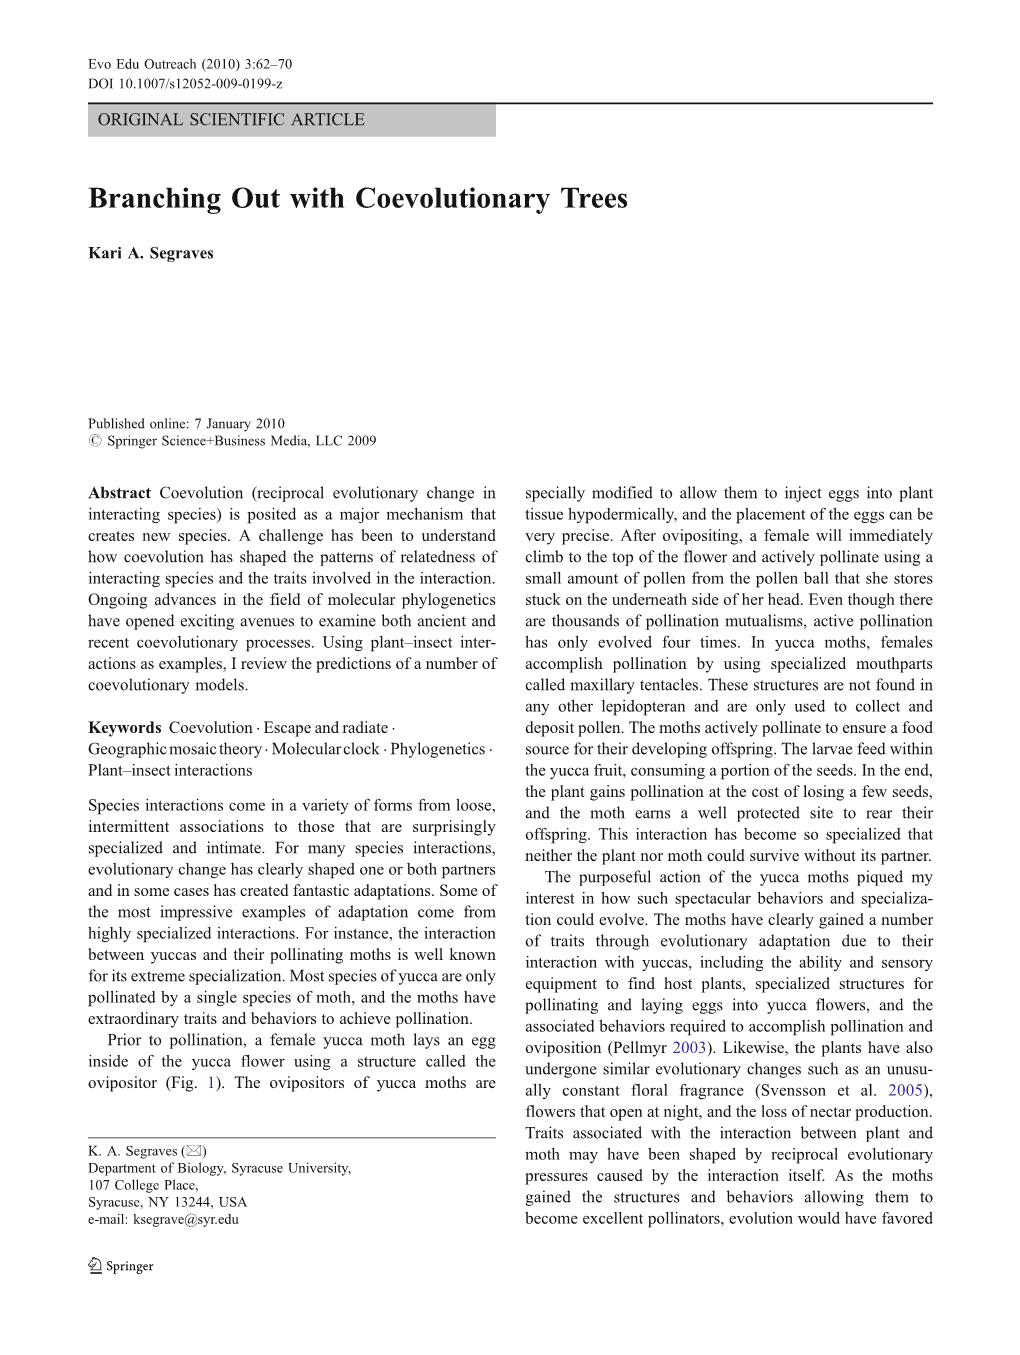 Branching out with Coevolutionary Trees